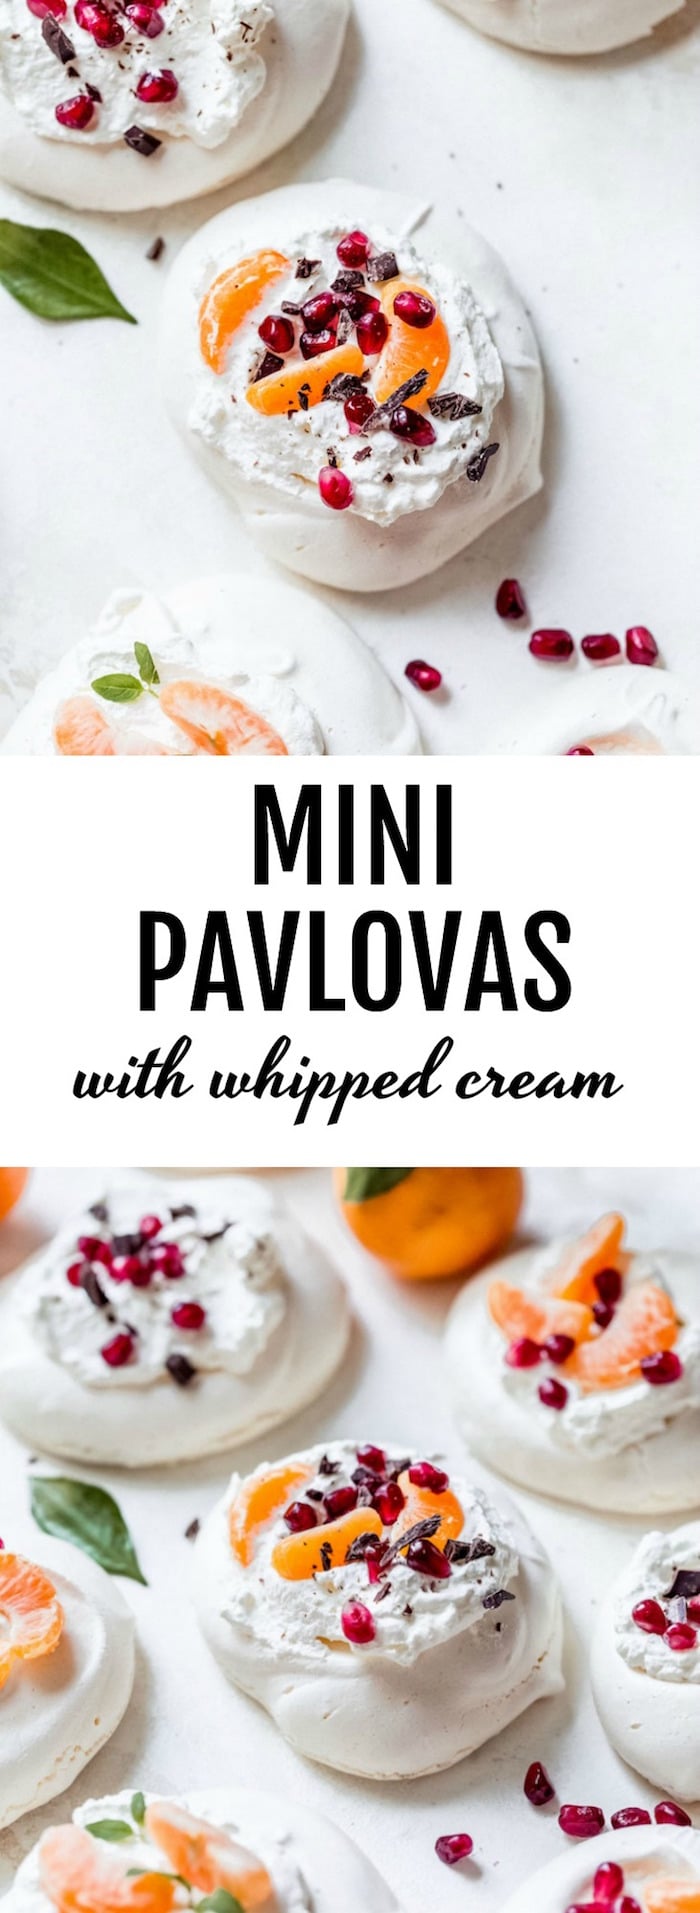 Mini Pavlovas with whipped cream and seasonal fruit -- the perfect dessert to "wow" guests! | thealmondeater.com